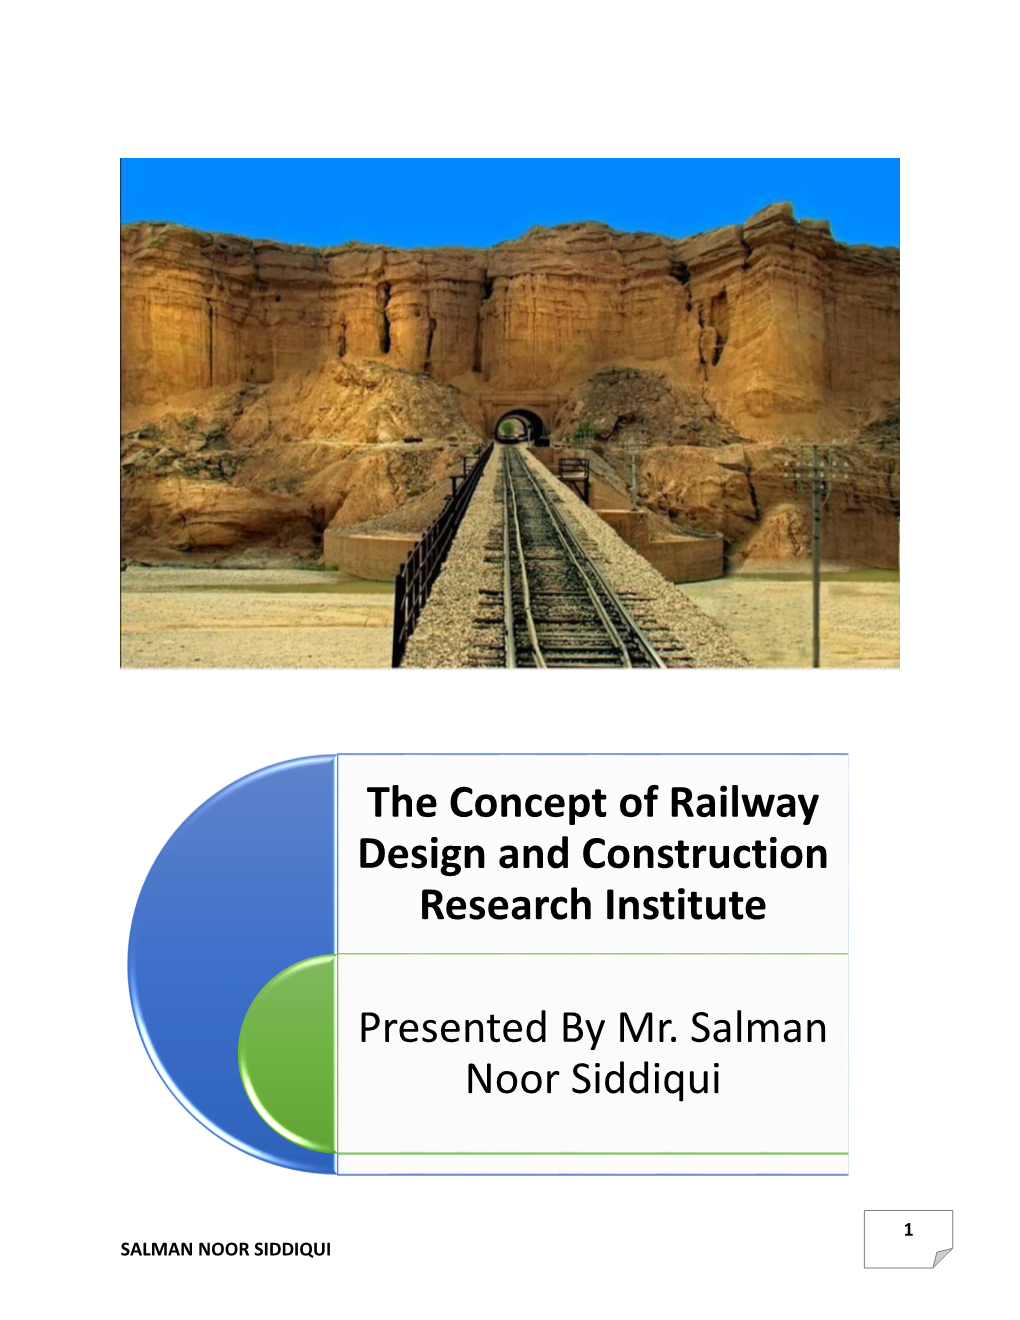 The Concept of Railway Design and Construction Research Institute